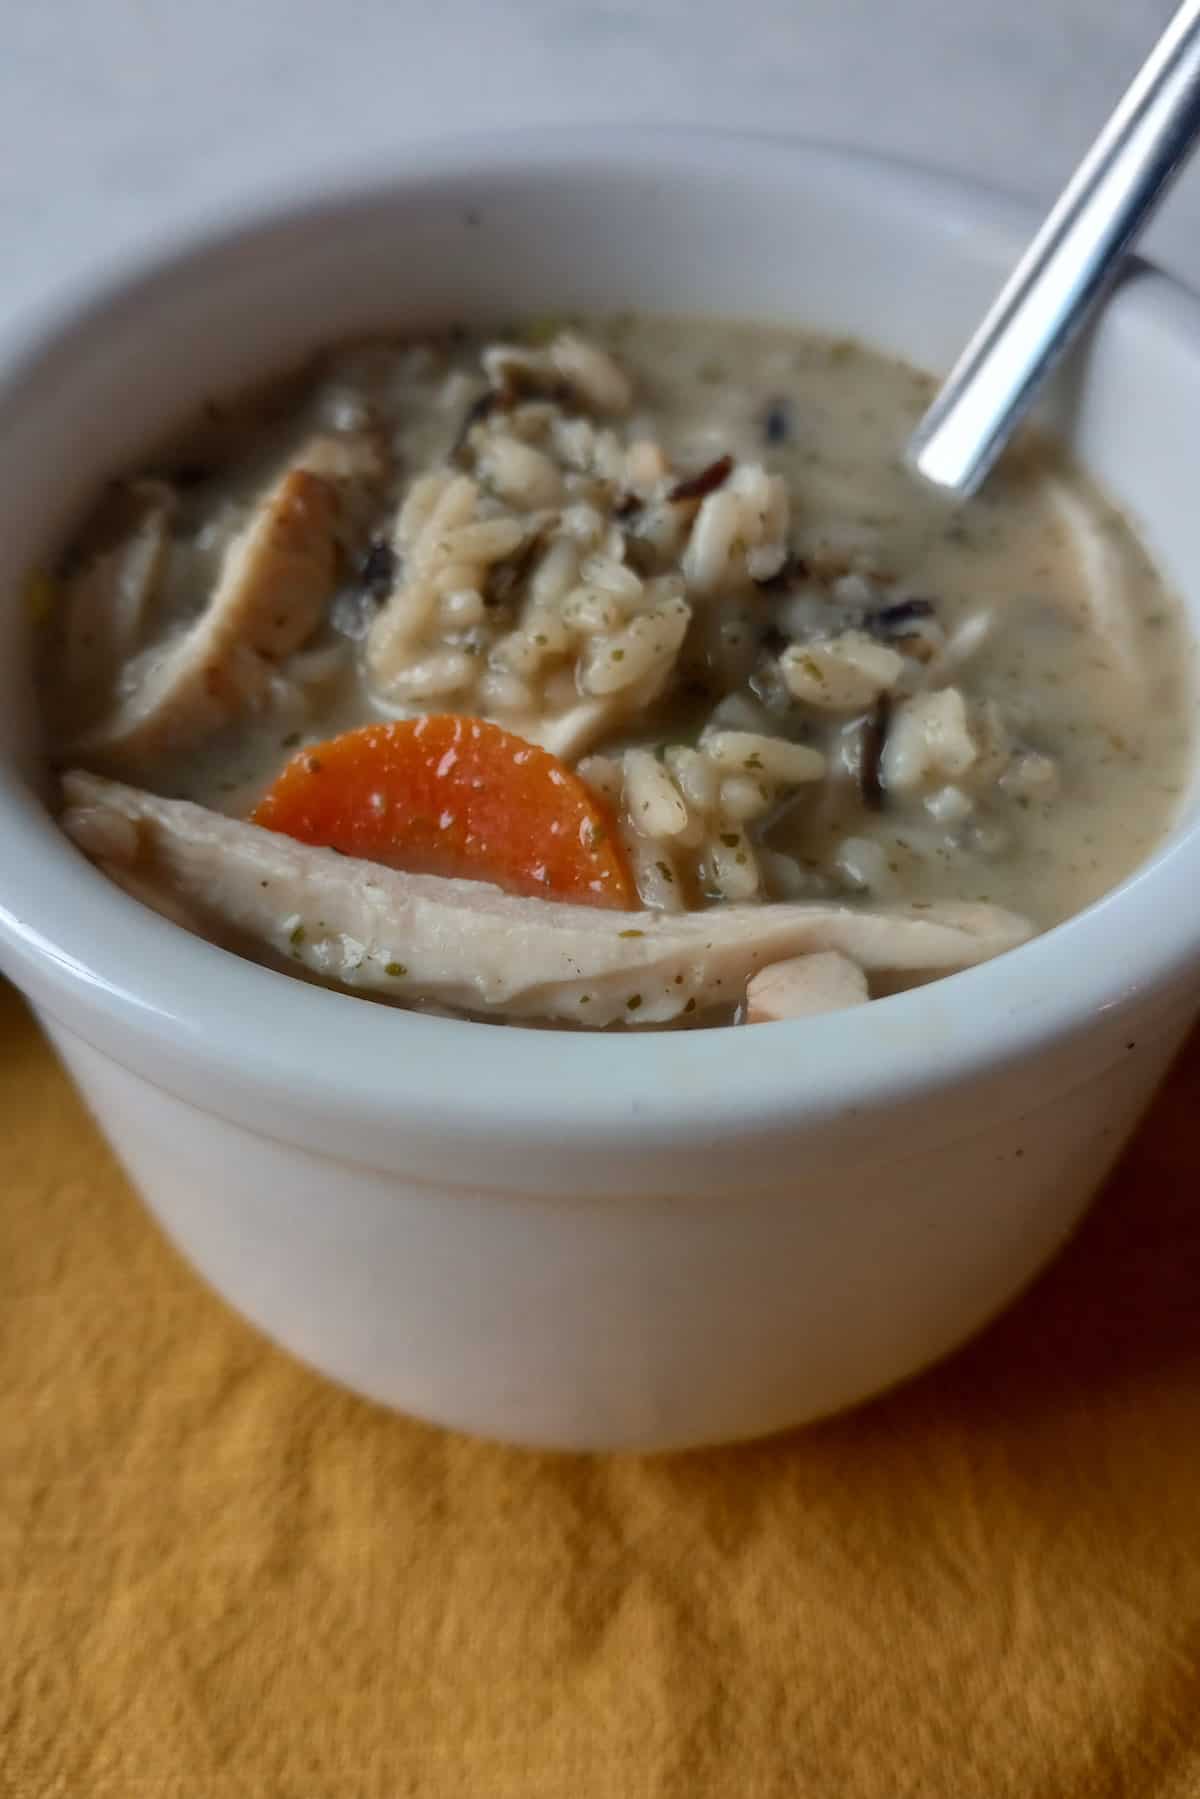 Cream of turkey soup with rice is a delicious recipe that uses leftover turkey.